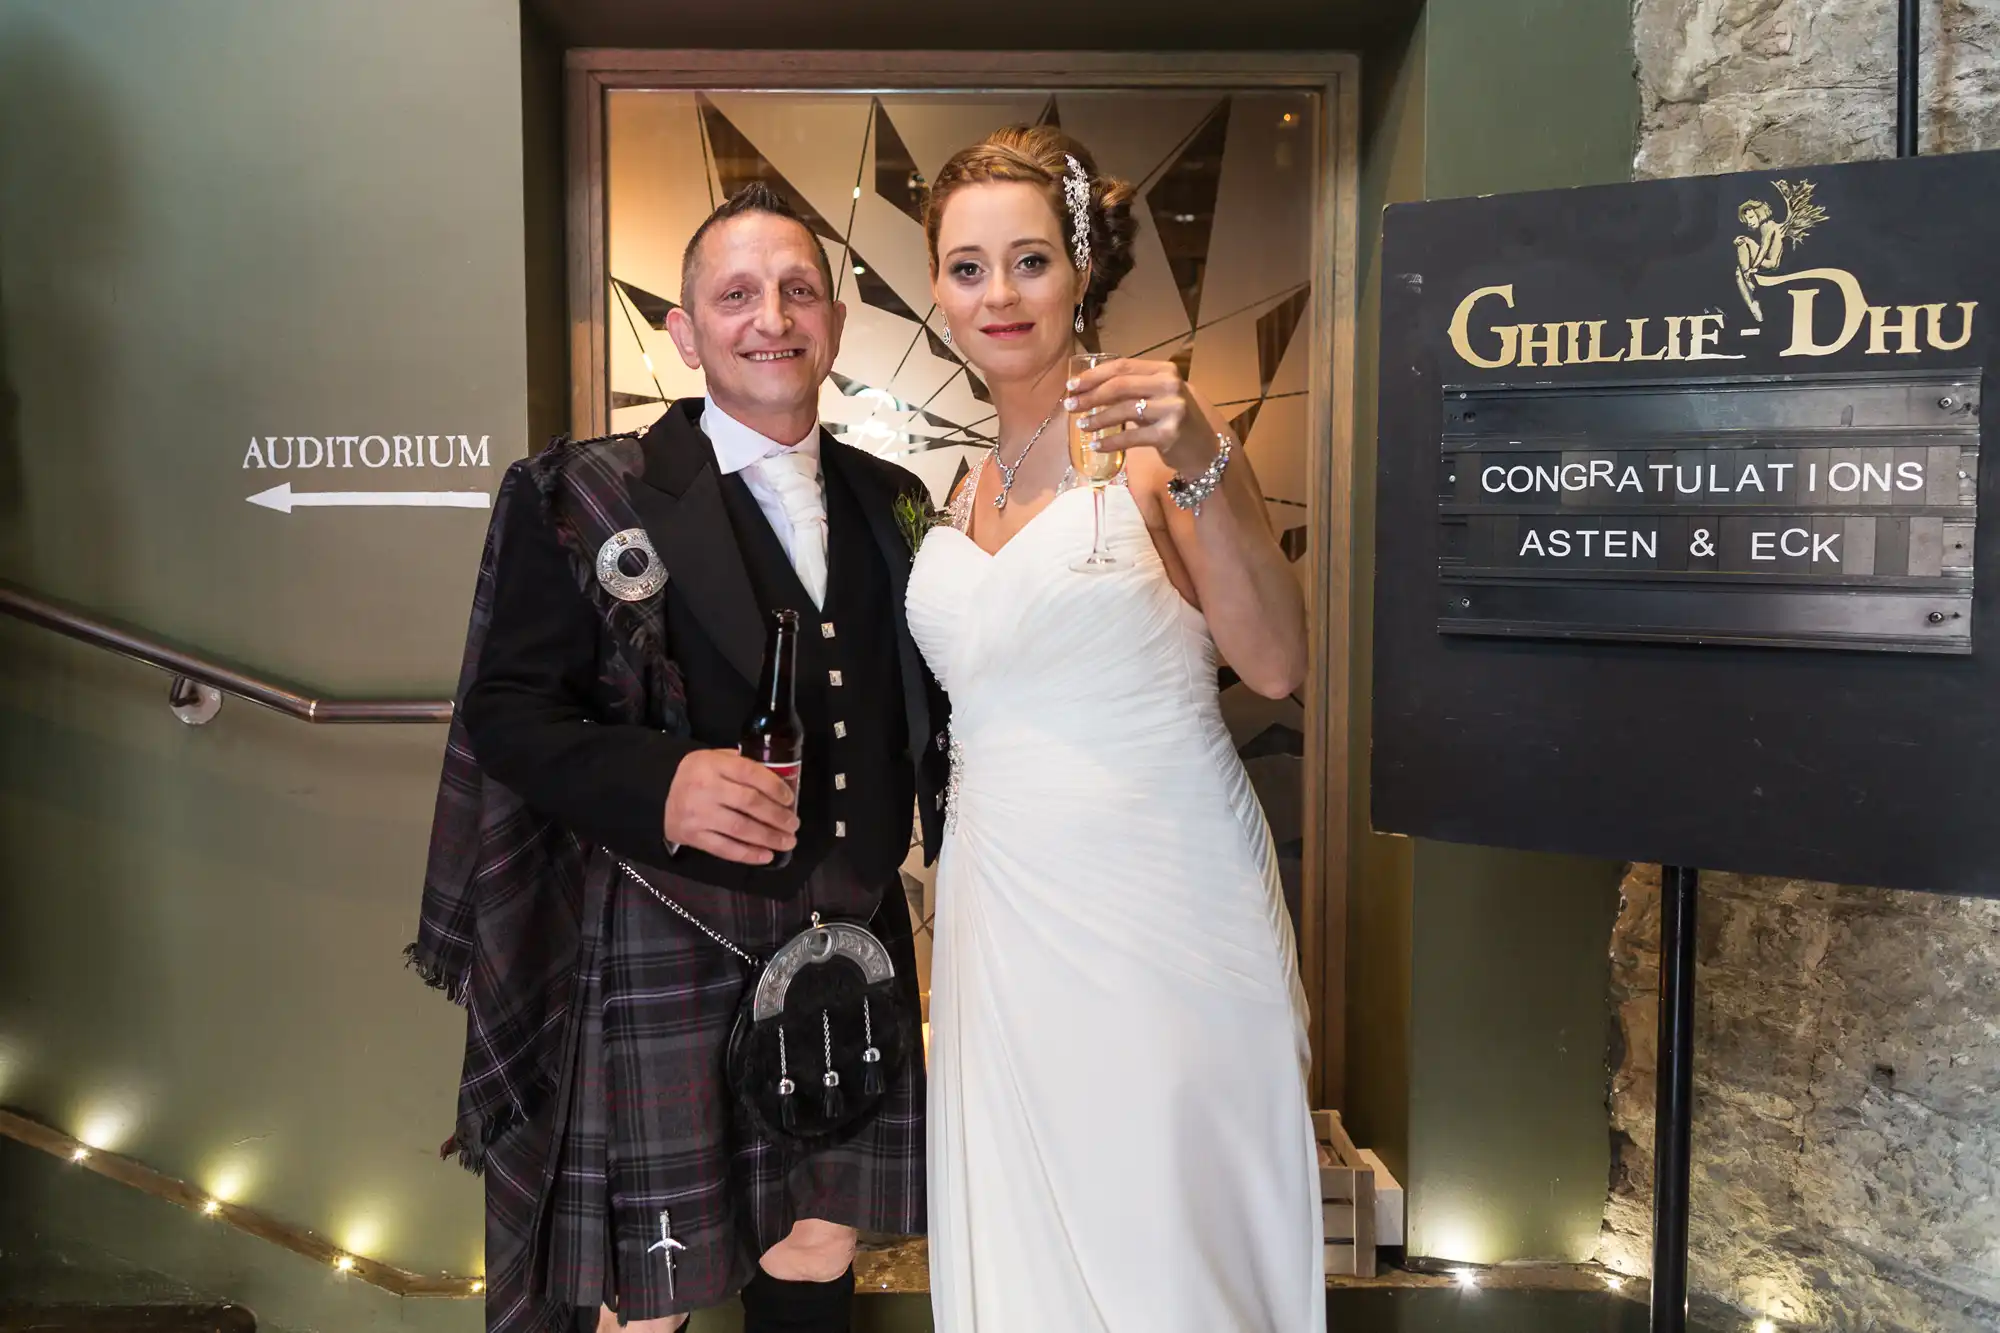 A newlywed couple in formal attire, standing beside a sign that reads "congratulations asten & eck" at ghillie dhu.